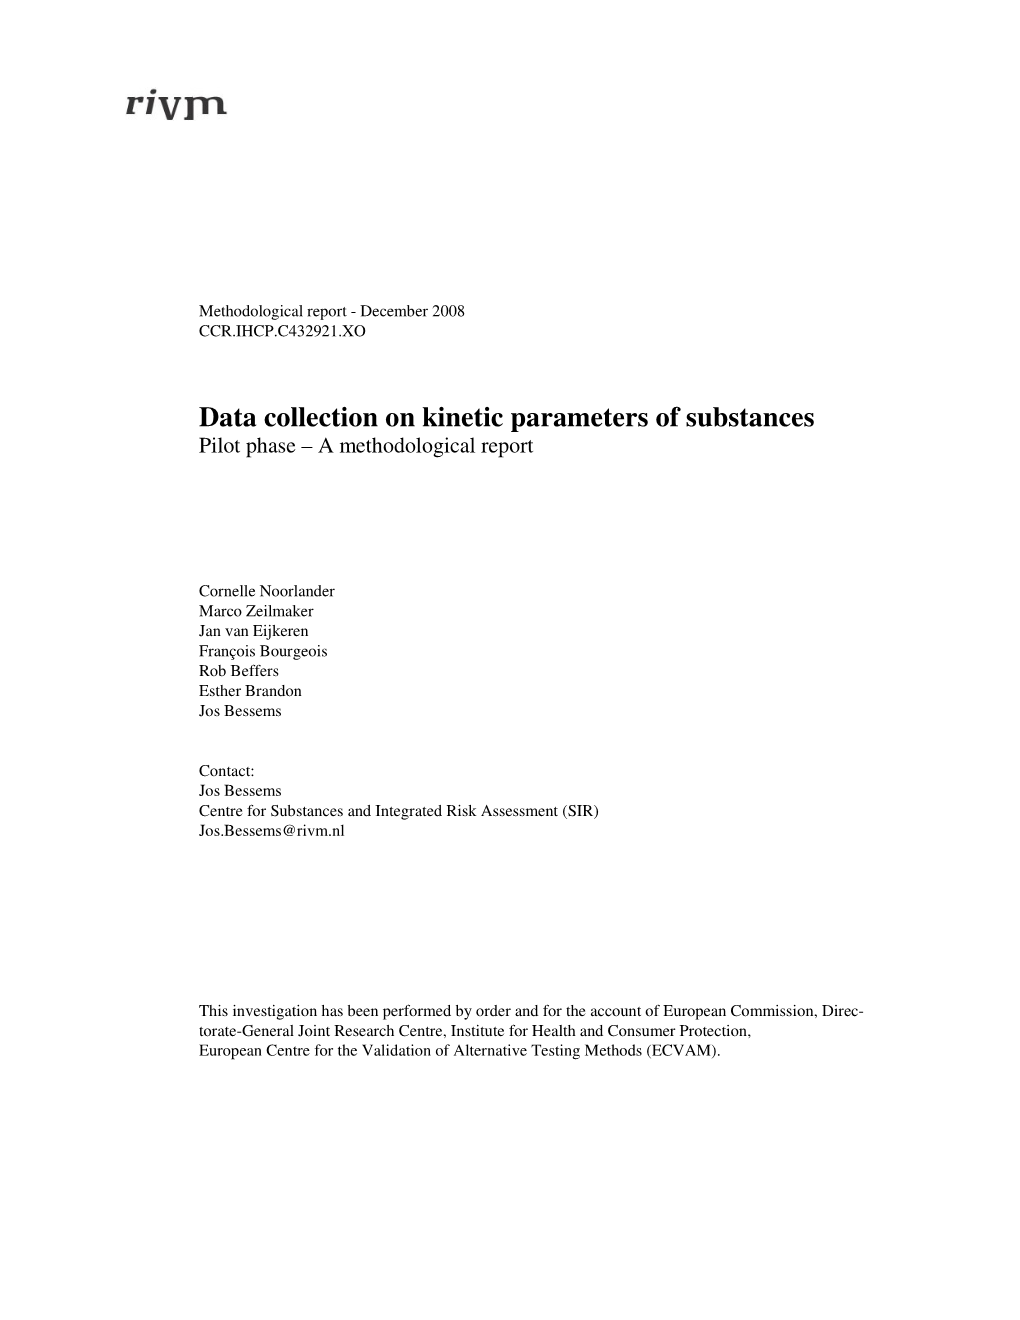 Data Collection on Kinetic Parameters of Substances Pilot Phase – a Methodological Report